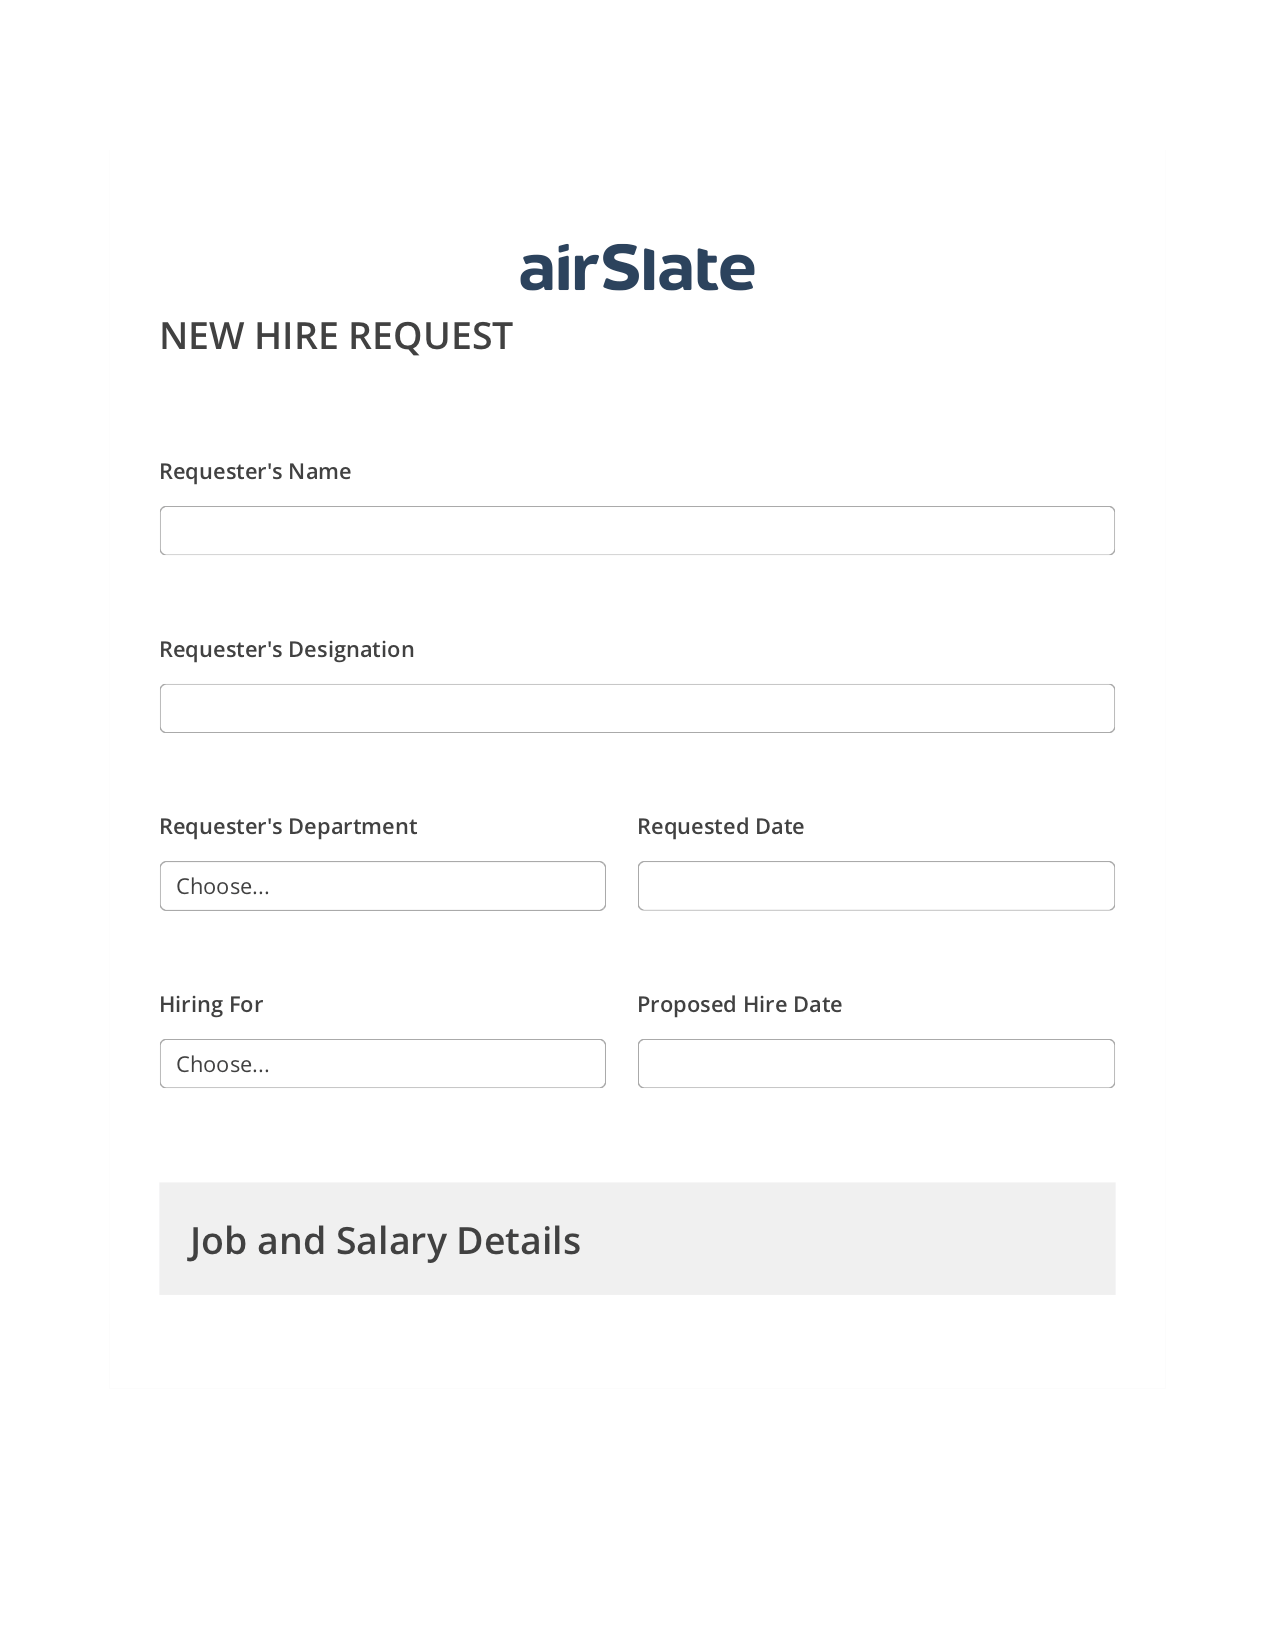 Hiring Request Workflow Pre-fill from Salesforce Records Bot, Jira Bot, Archive to SharePoint Folder Bot